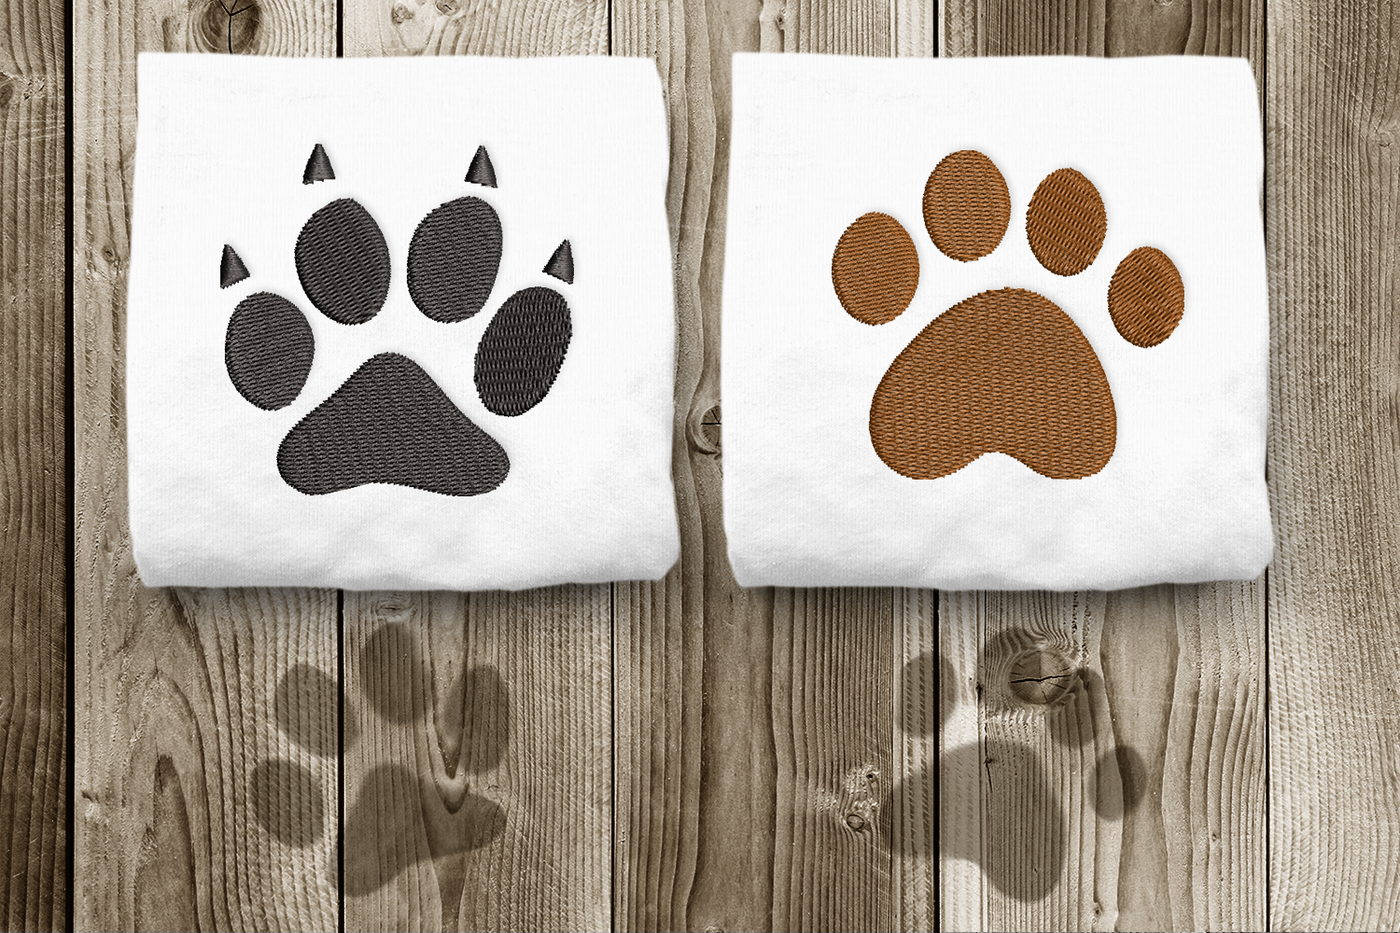 Cat and dog paw print embroidery design duo. Each is shown stitched onto a folded white square of fabric.